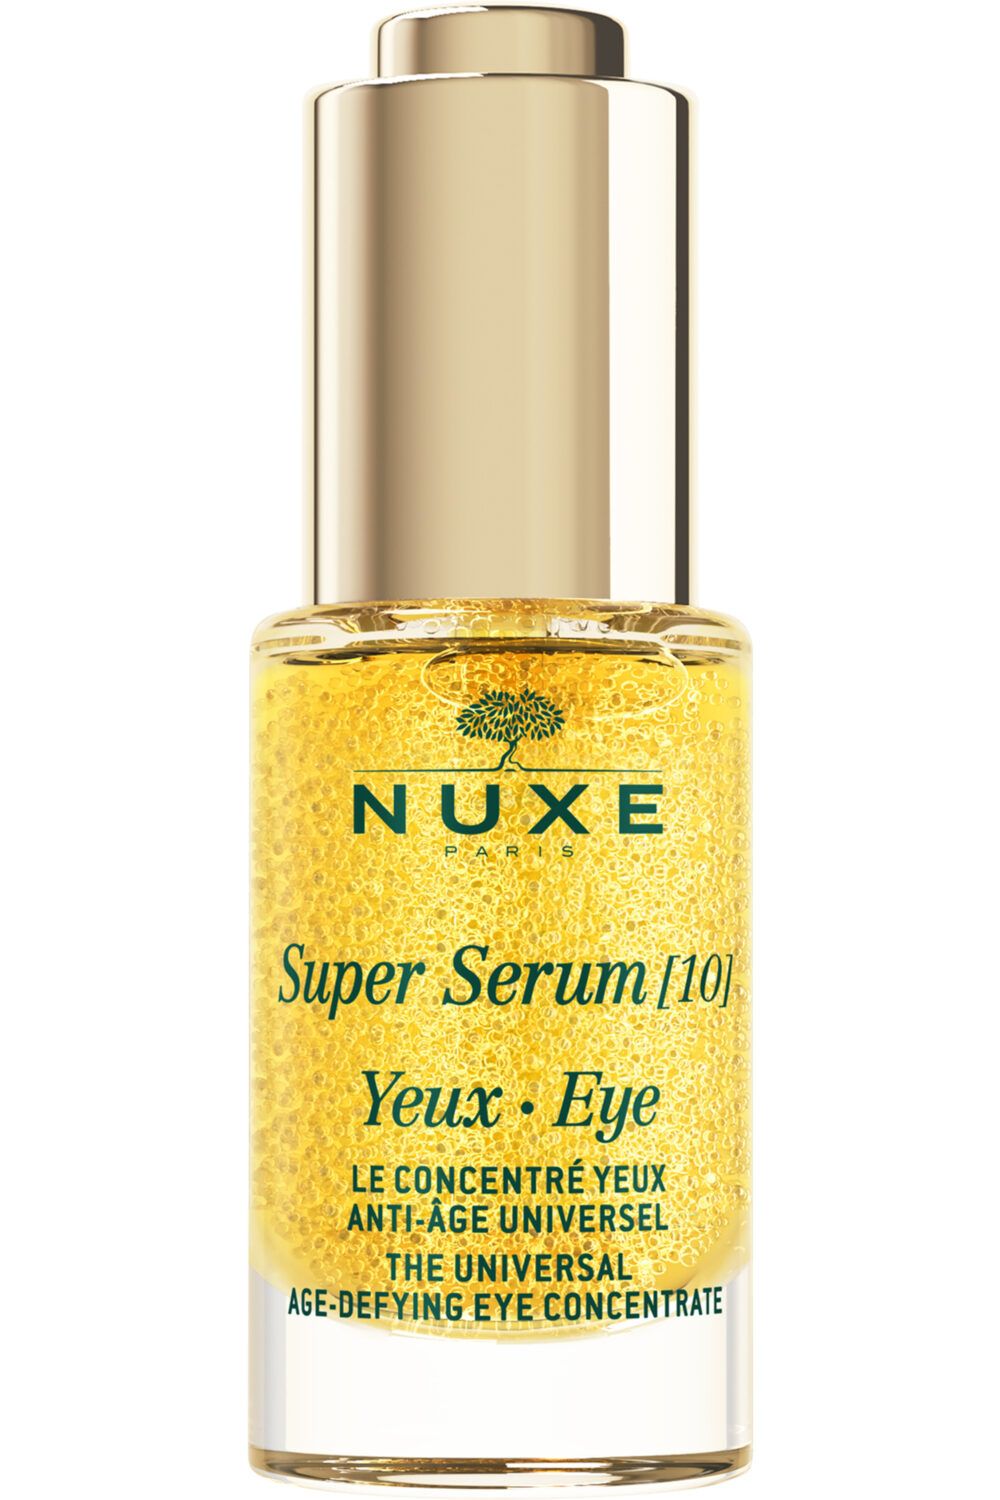 Nuxe - Super Serum [10] yeux anti-âge